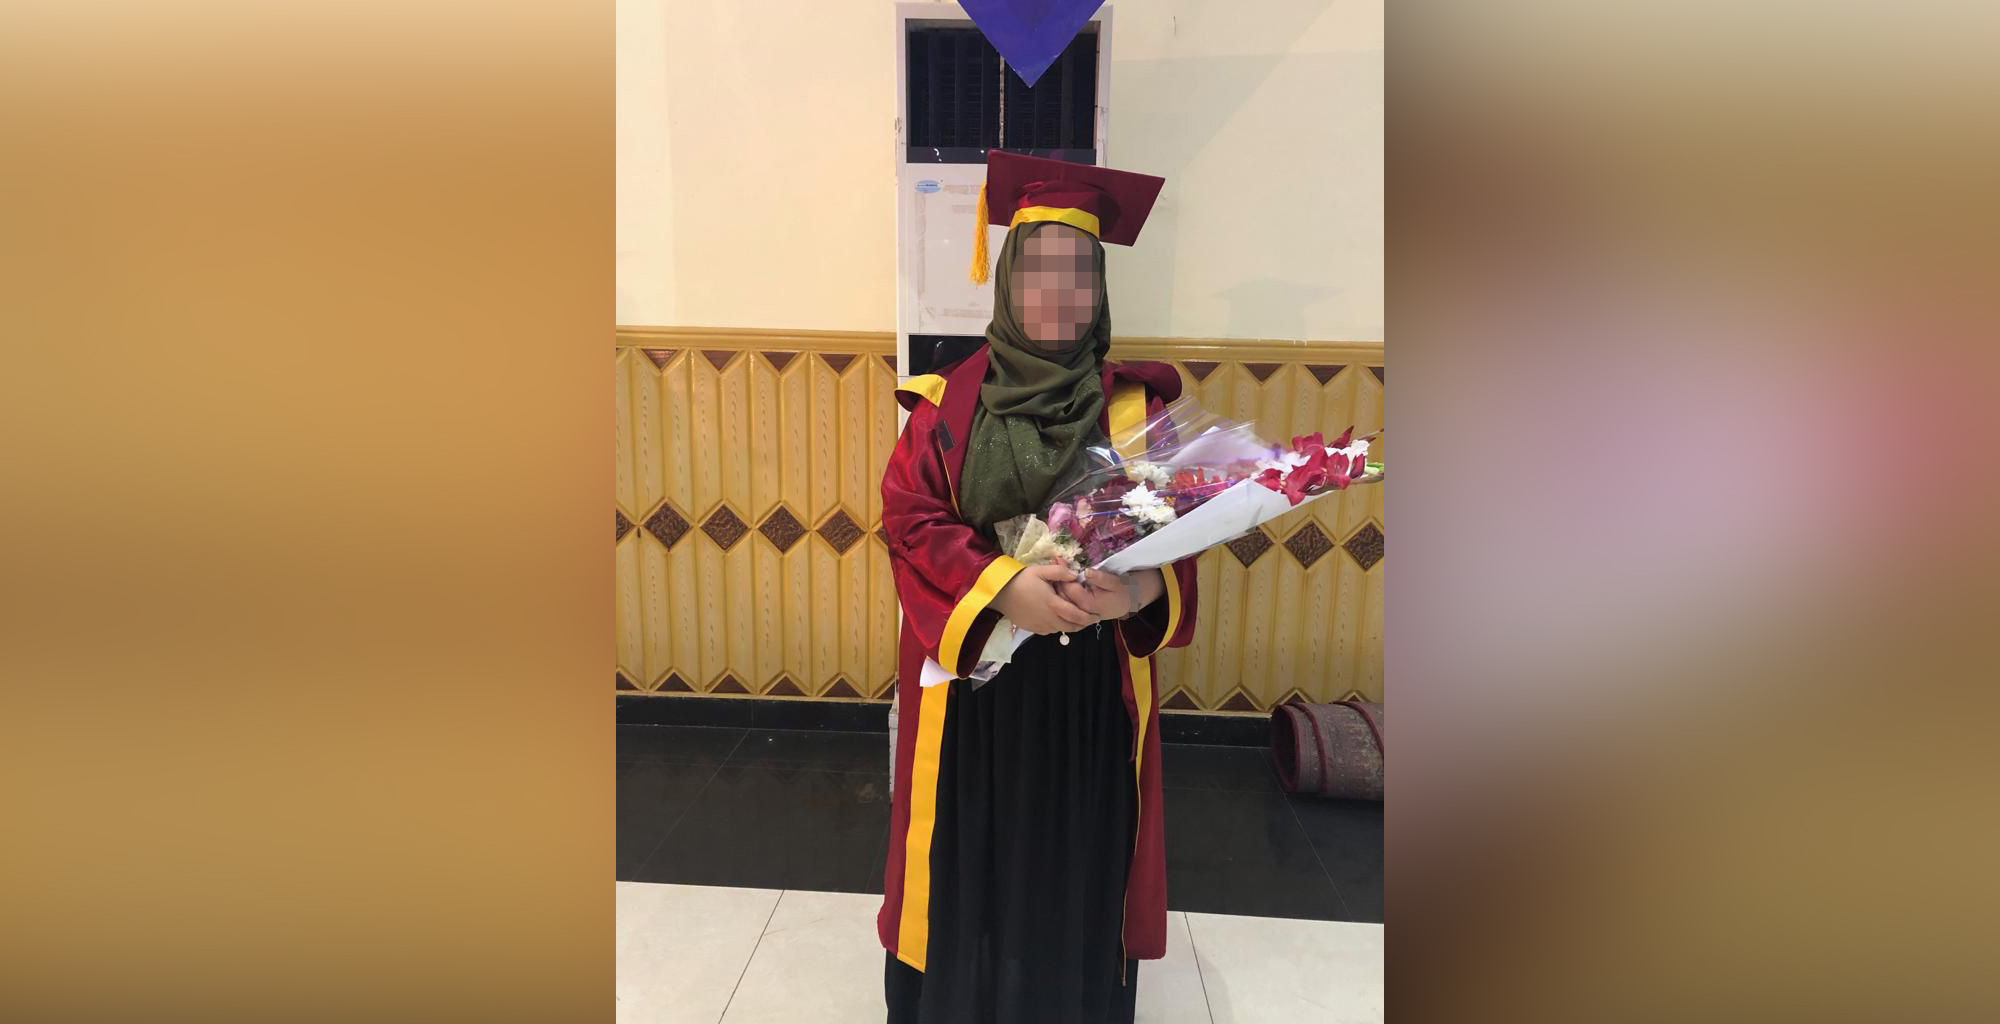 PHOTO: An Afghan woman, whose name is being withheld for security concerns, graduates from university in a 2018 family photo.